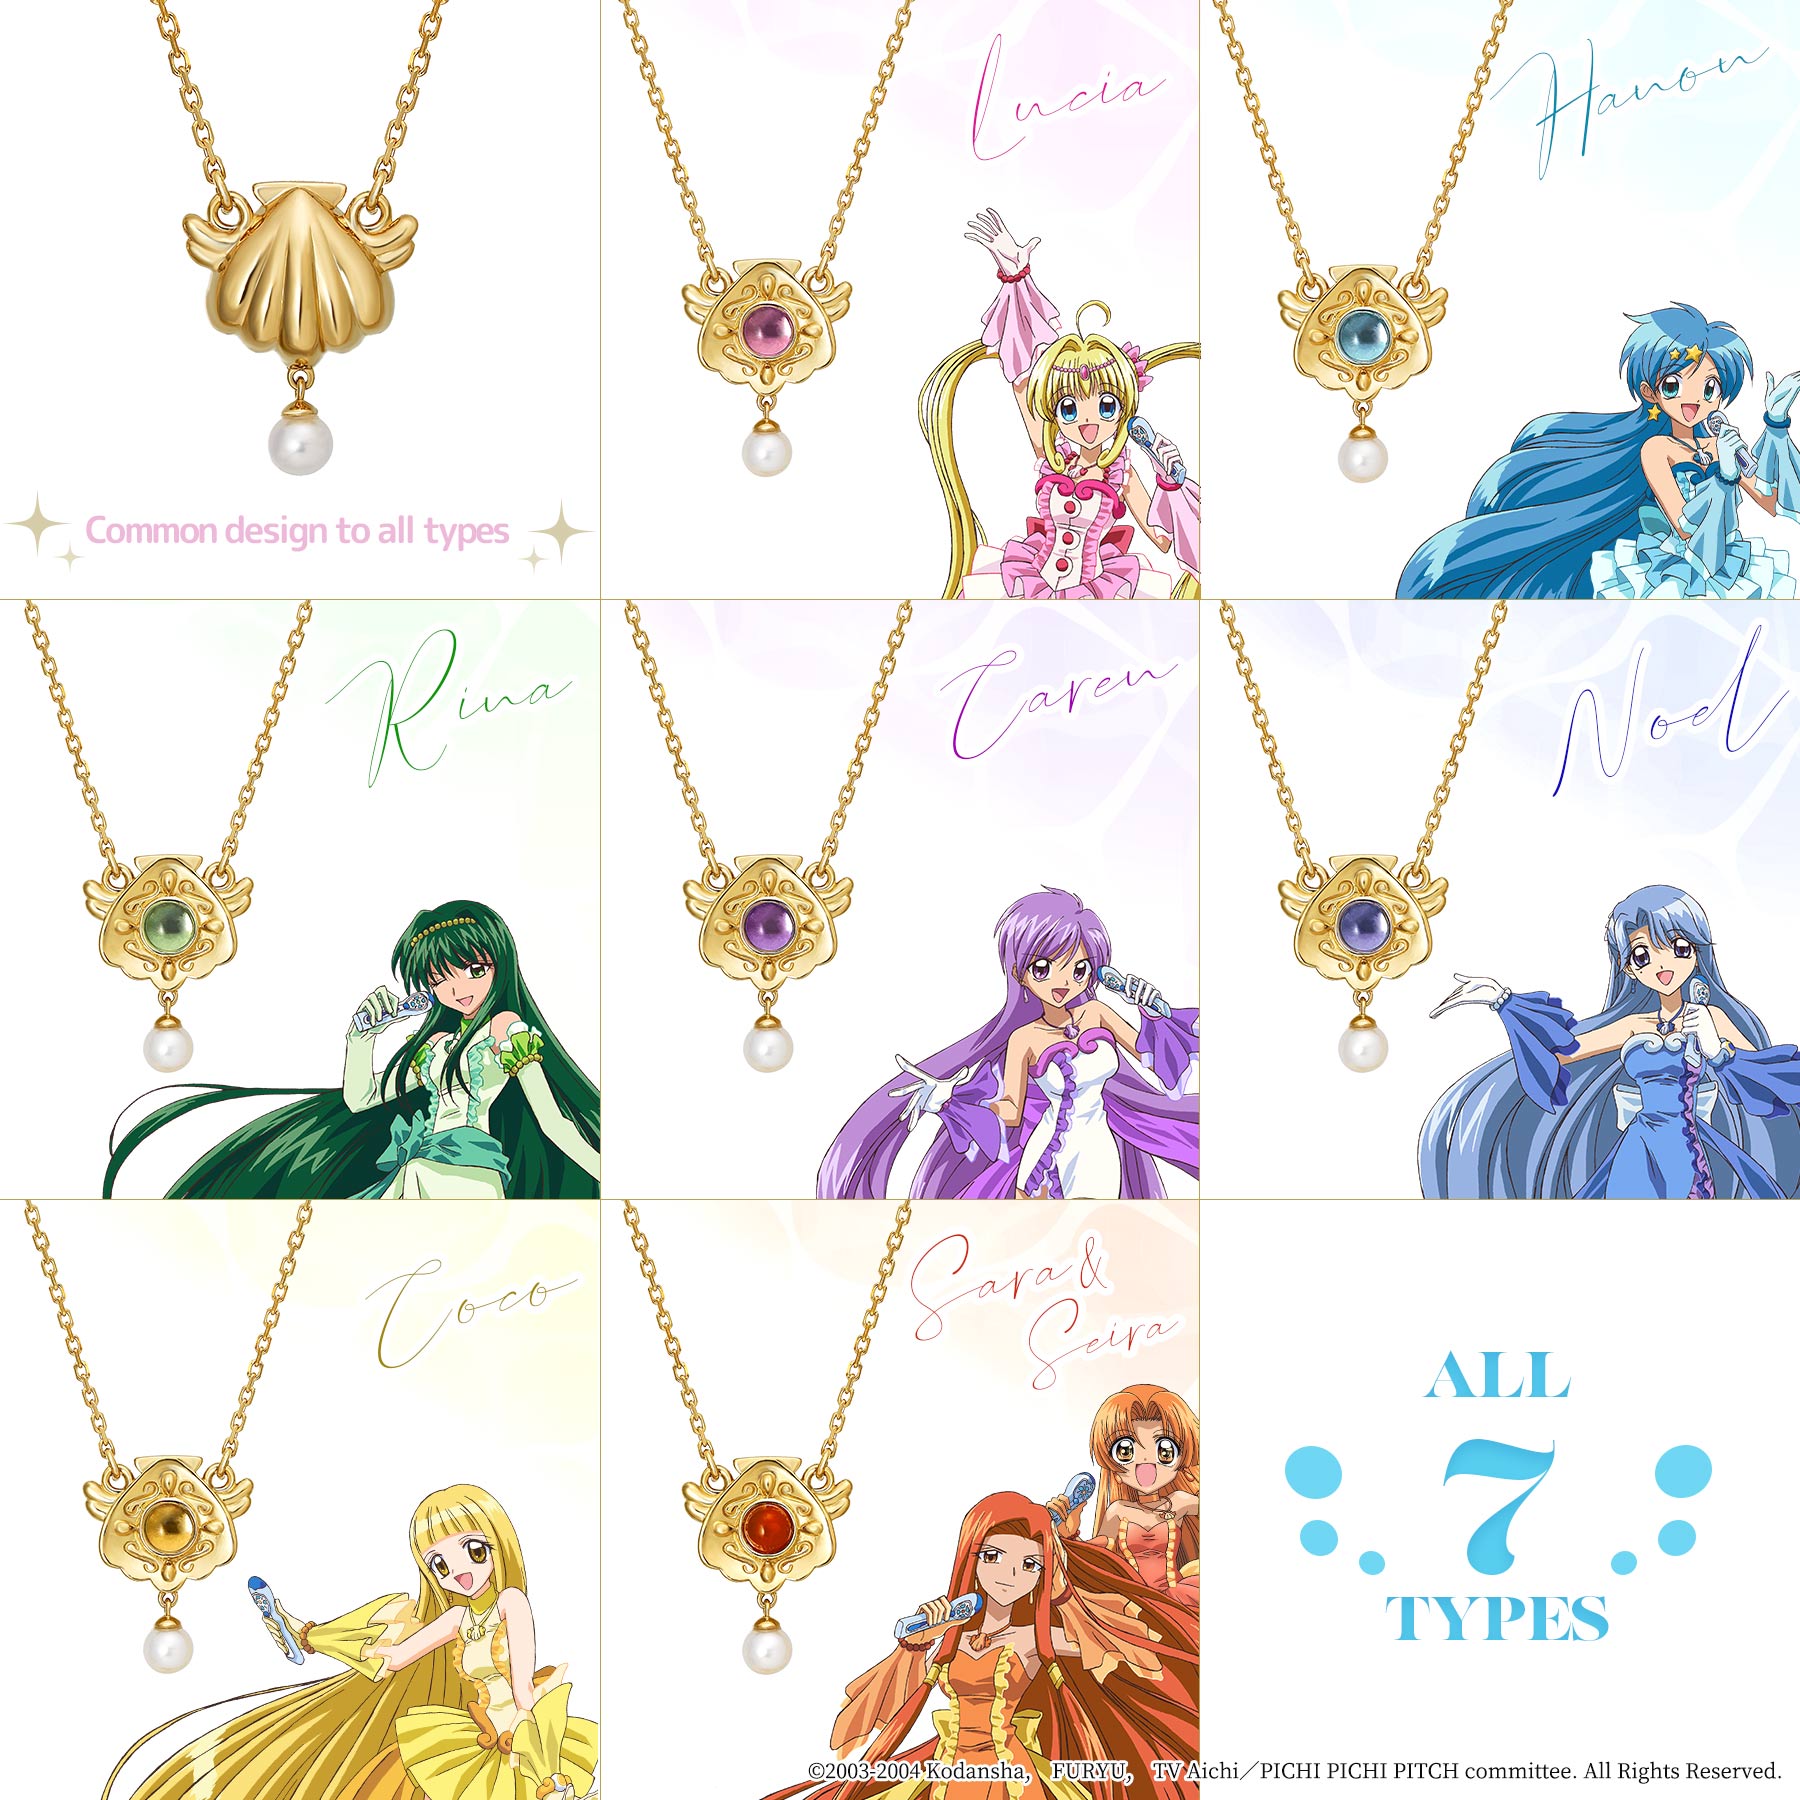 Mermaid Melody Pichi Pichi Pitch - Reversible Necklace (Rina Toin) - All Characters